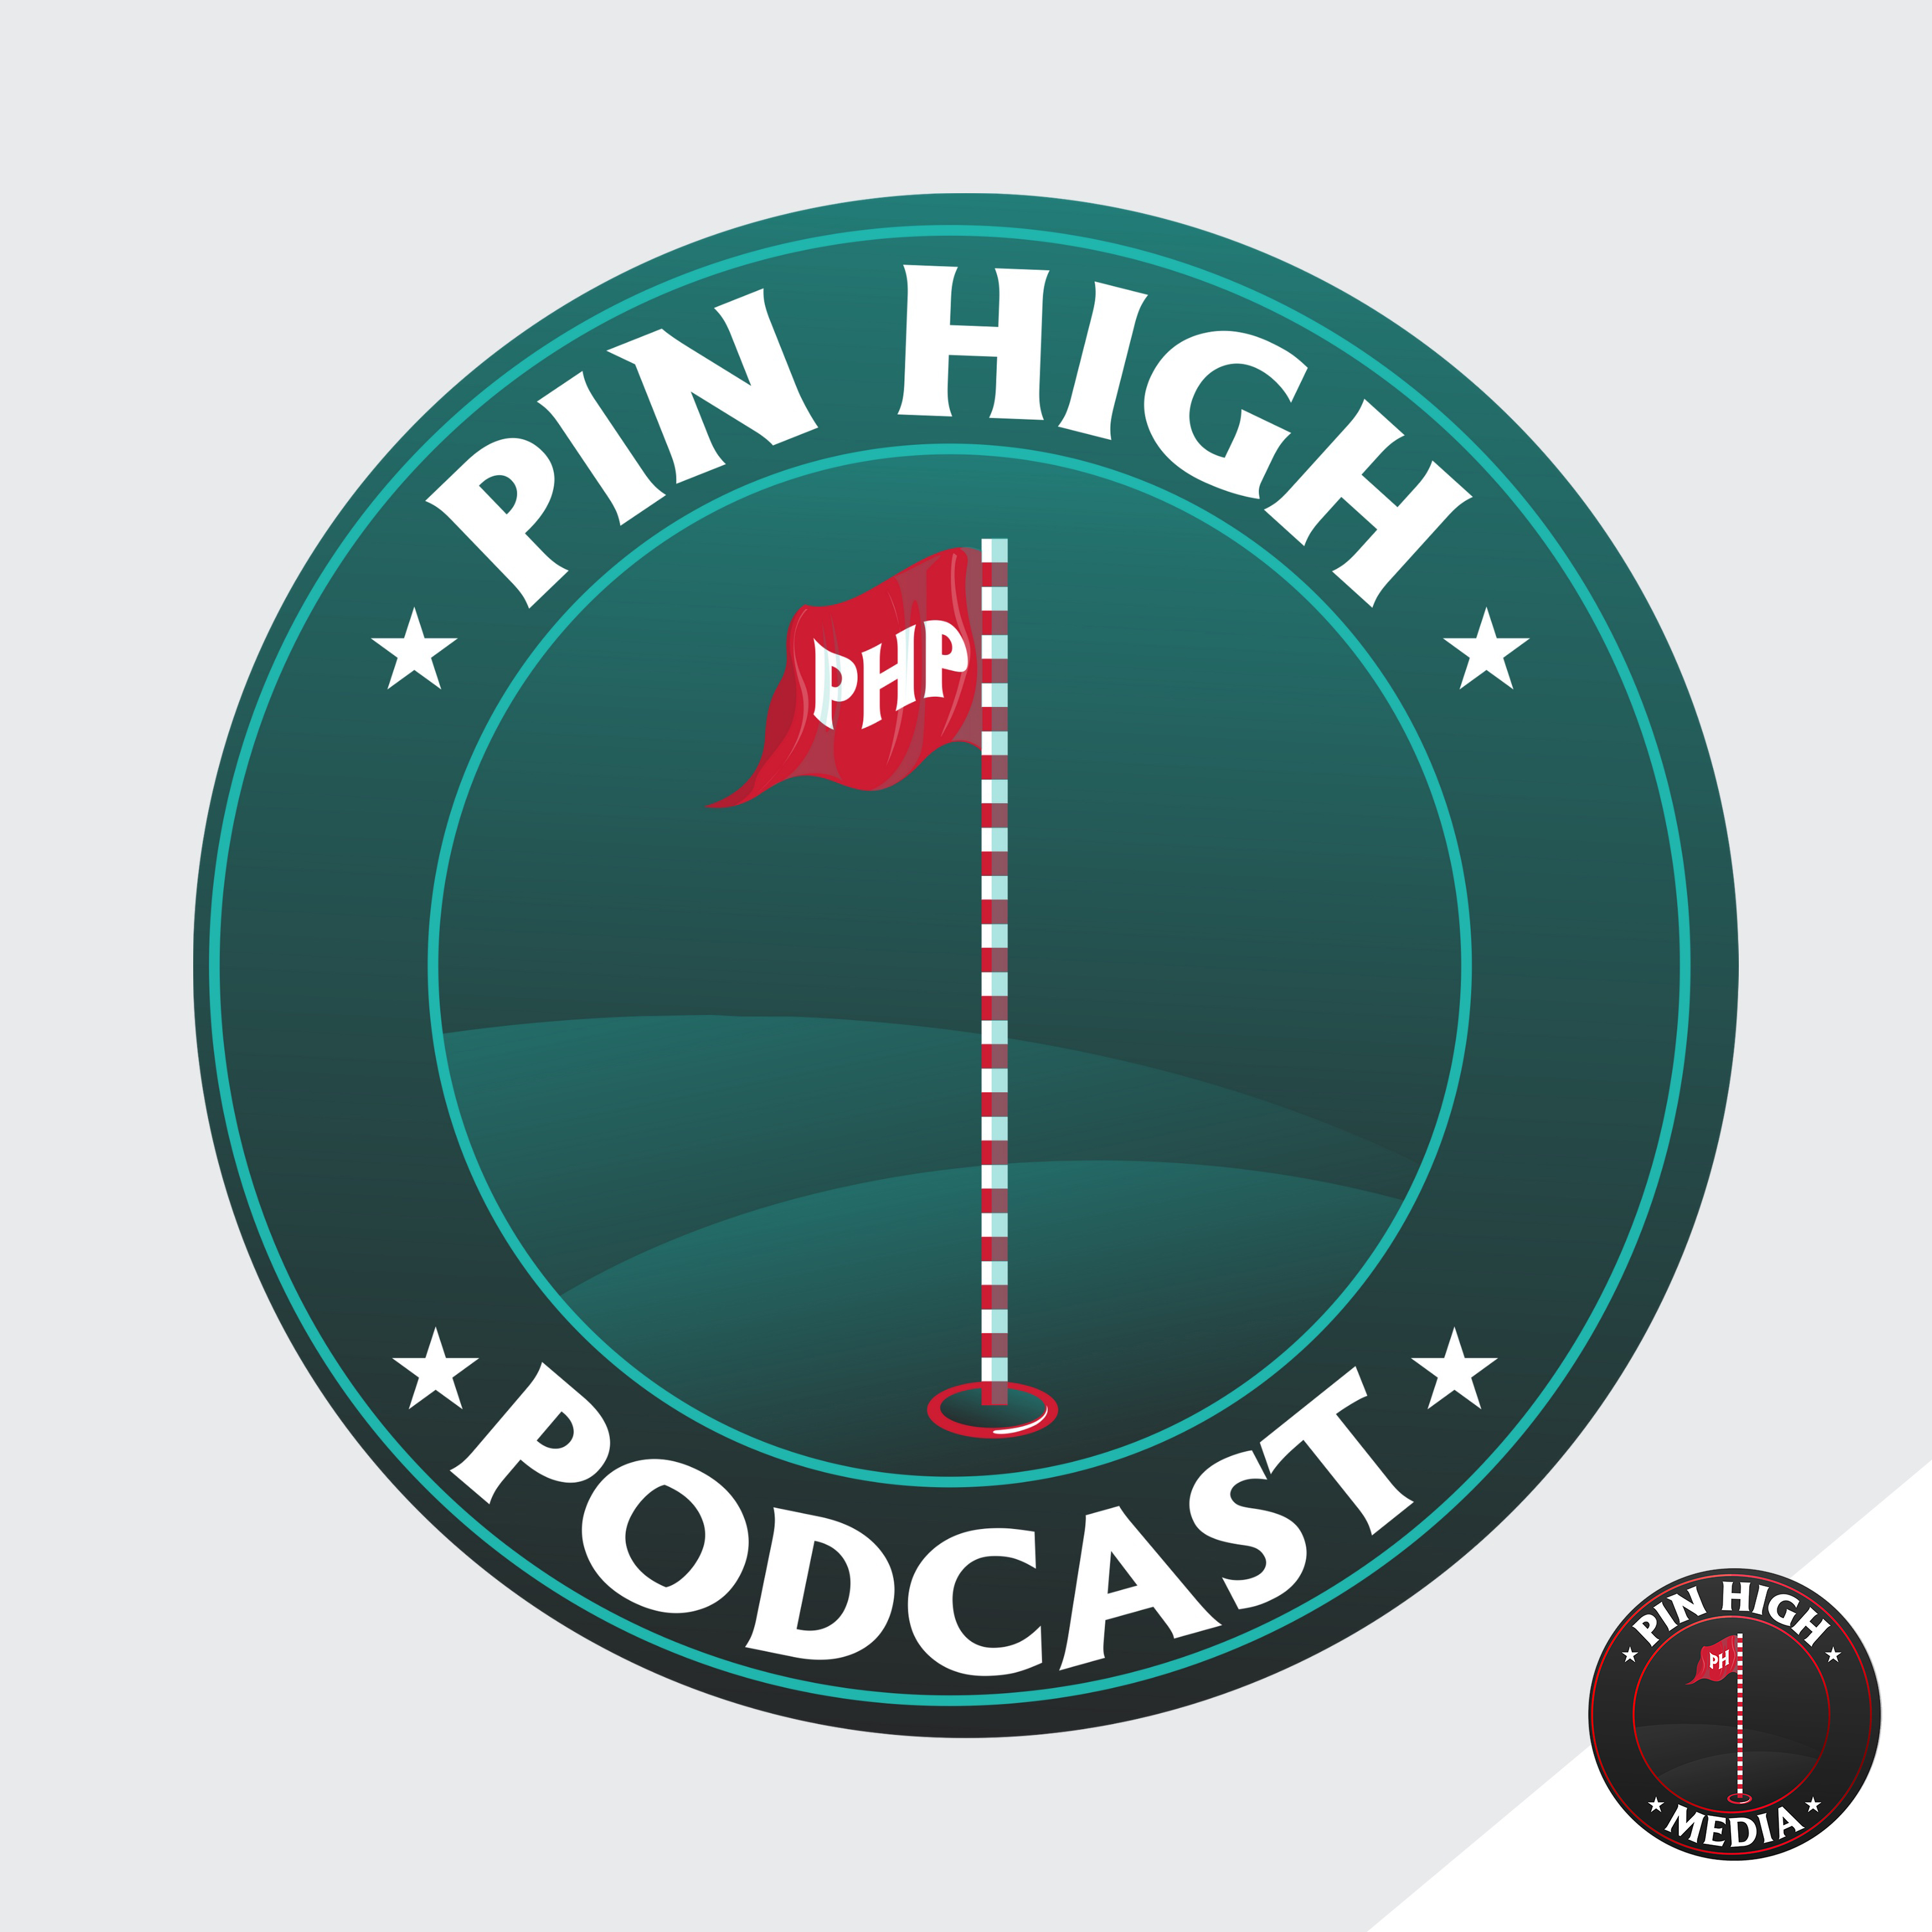 Pin High Podcast Ep. 186: This Putter Can Help You Putt Like a TOUR Pro!